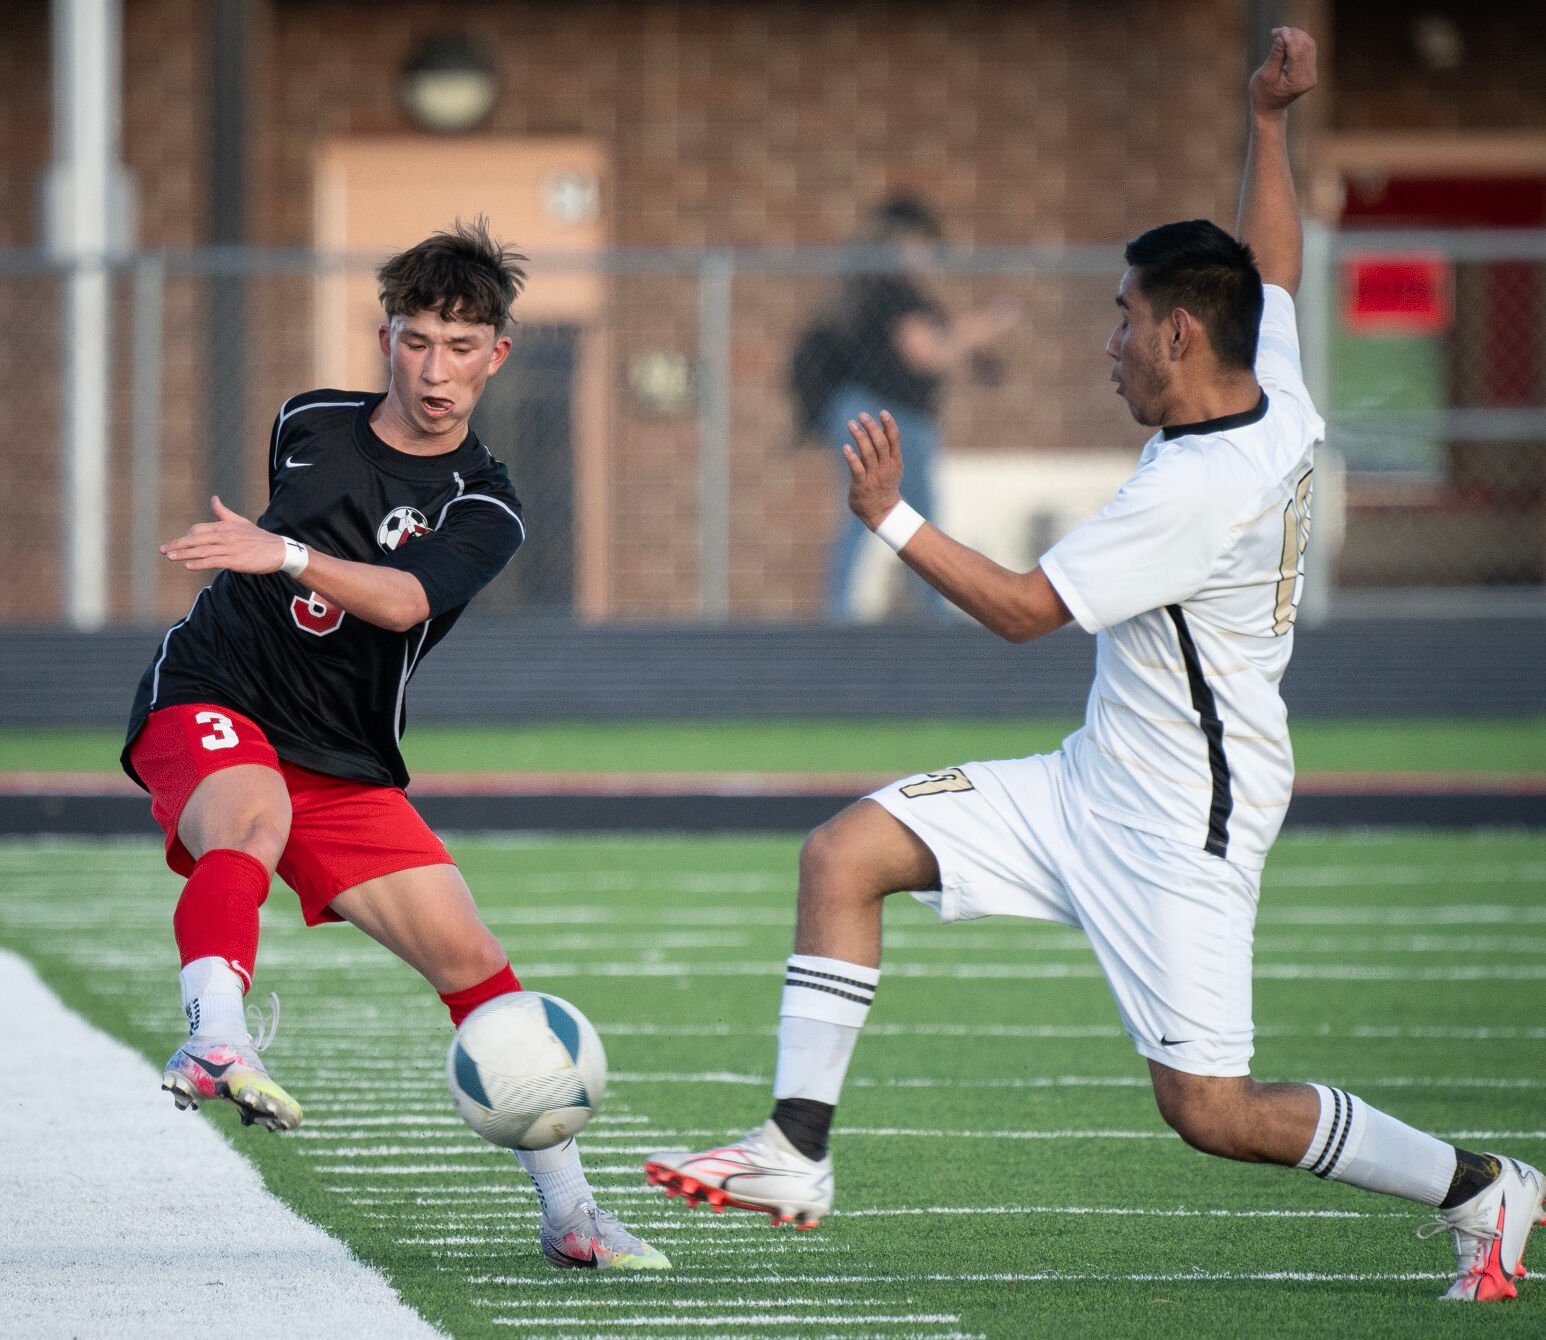 Central Dominates Cheyenne South in 4-0 Victory with Custis and Black Leading Goals